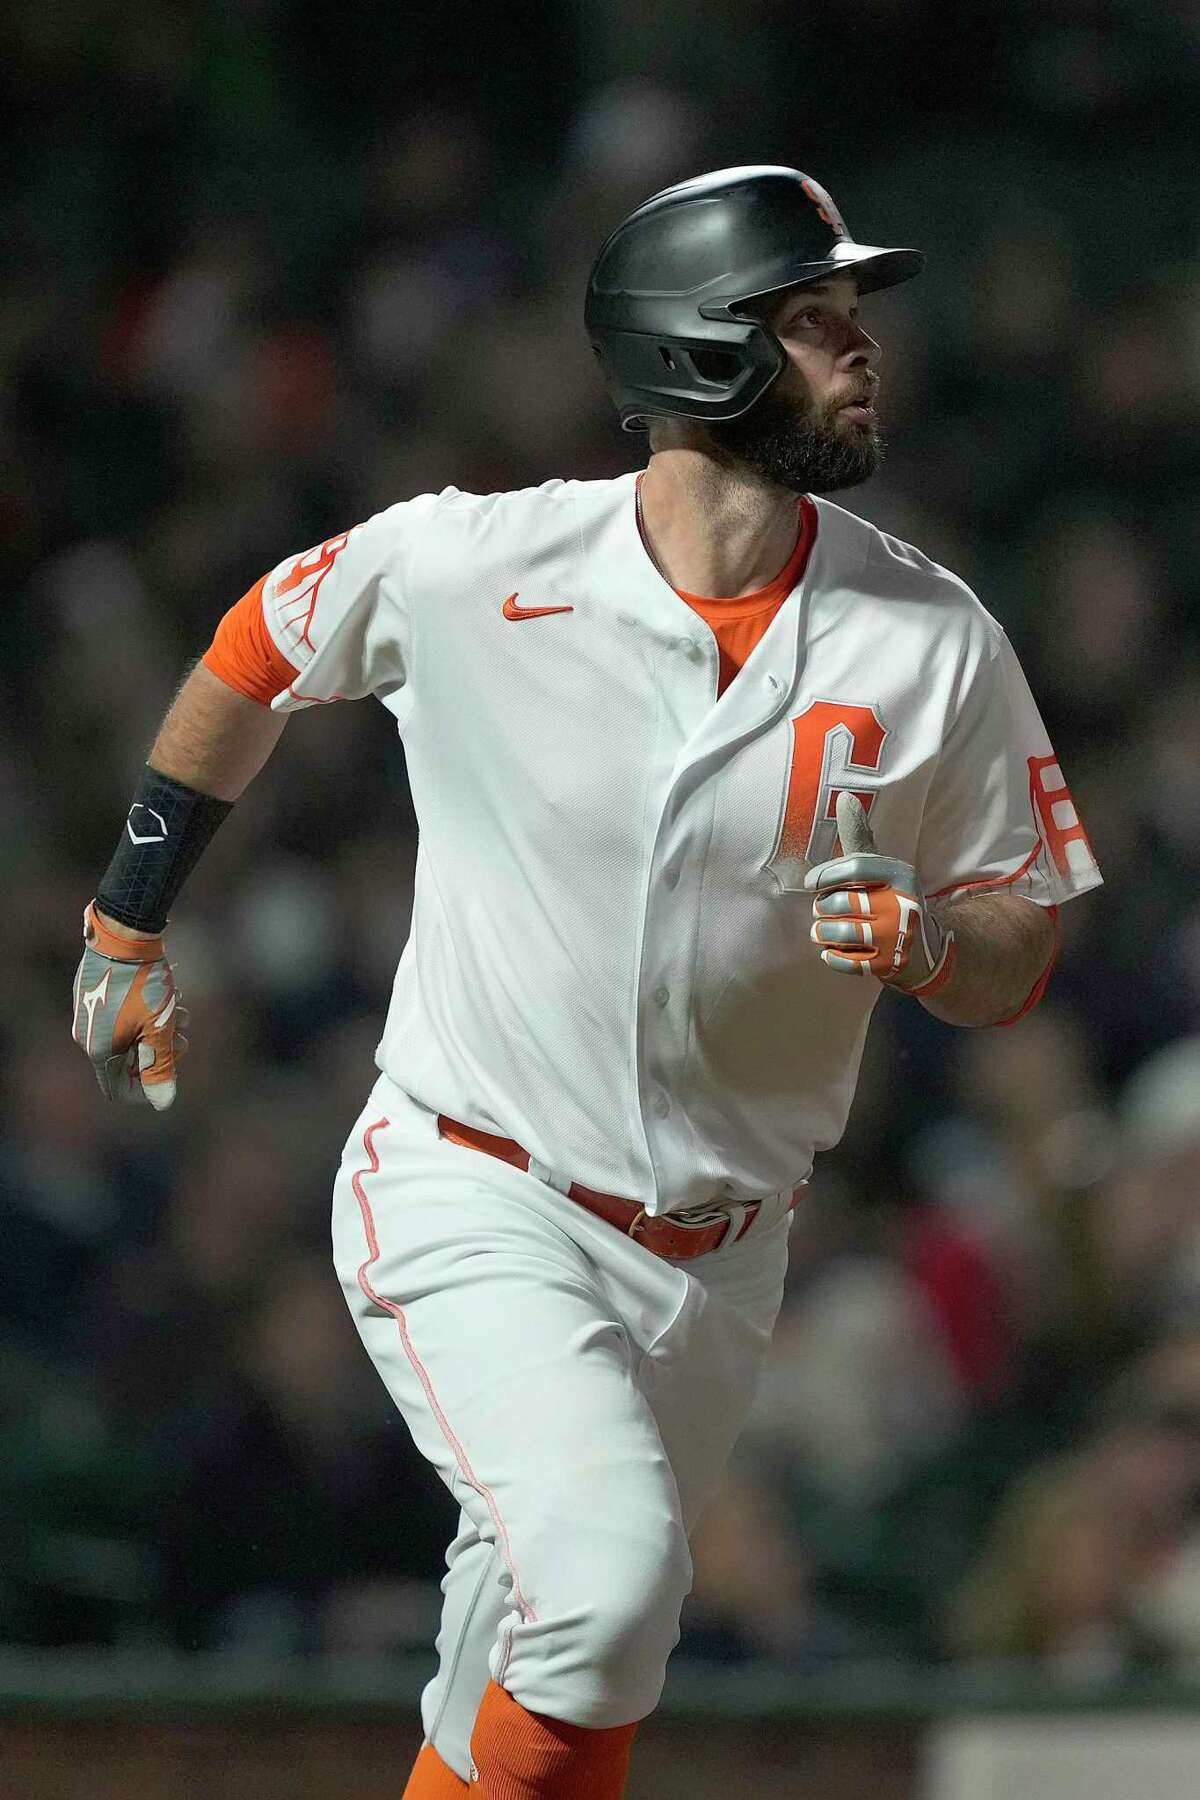 San Francisco Giants' Brandon Belt watches his solo home run against the Milwaukee Brewers during the sixth inning of a baseball game Tuesday, Aug. 31, 2021, in San Francisco. (AP Photo/Tony Avelar)